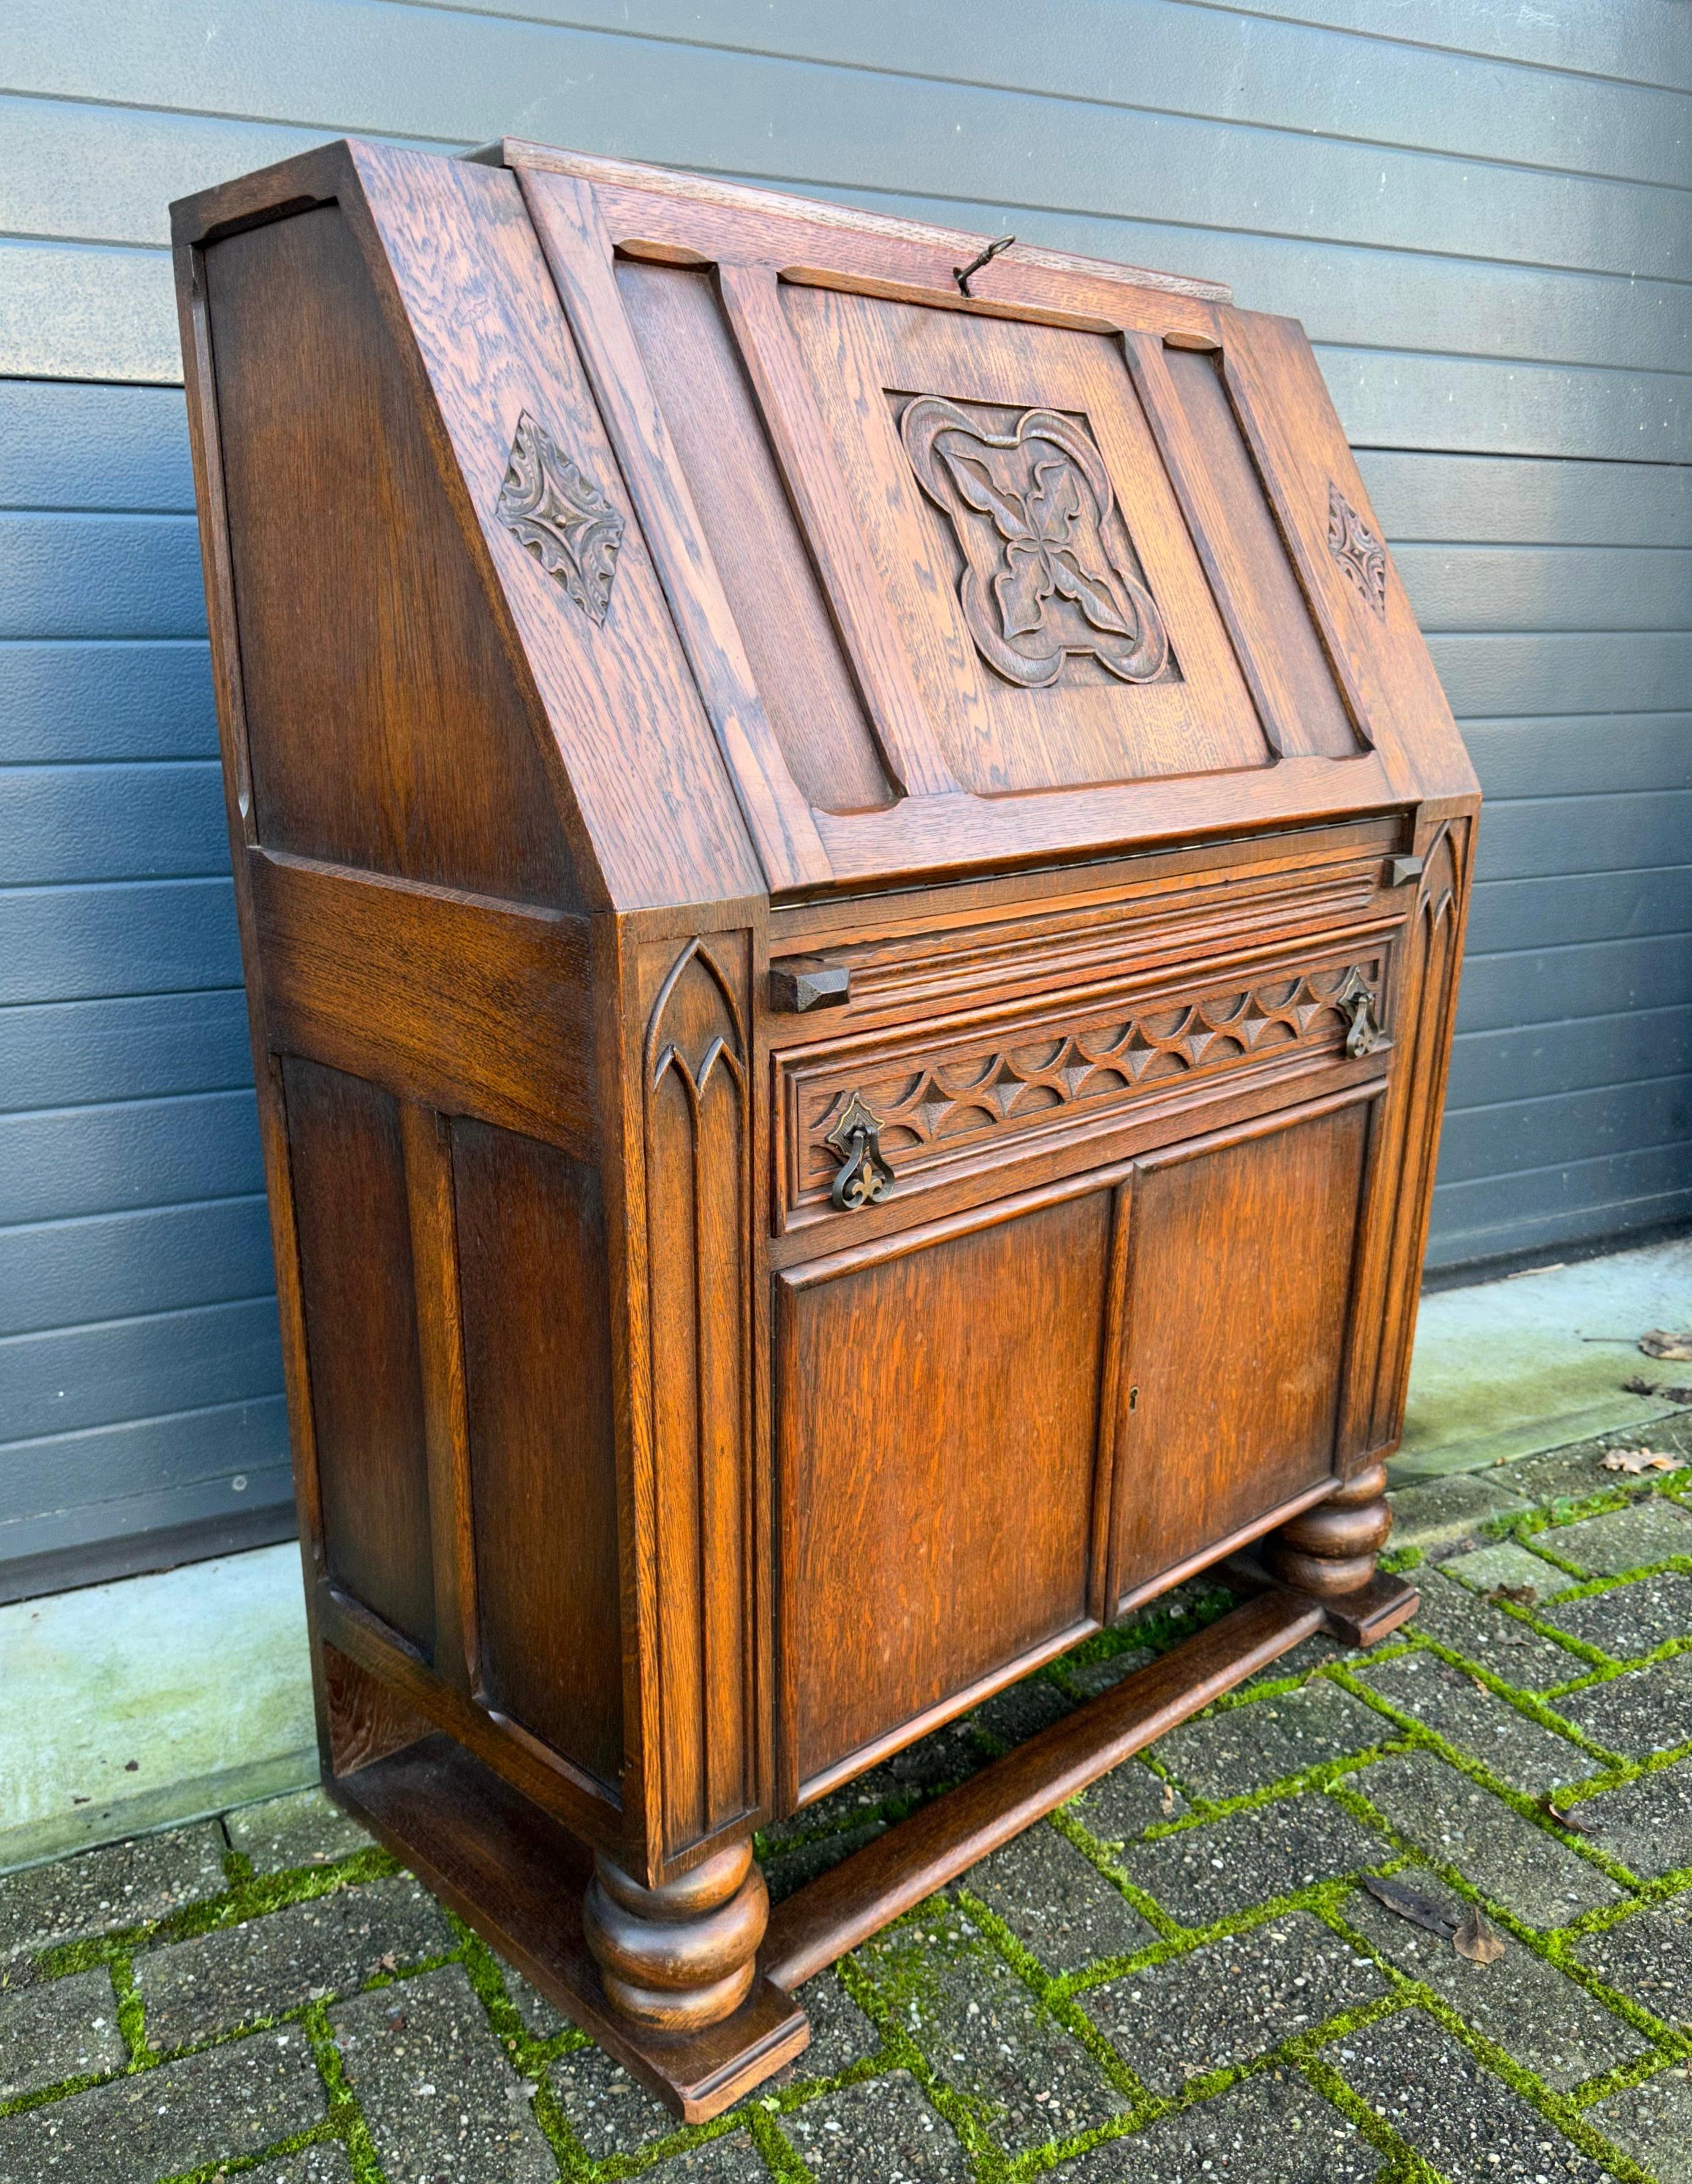 Rare, wonderful and practical, Gothic Revival desk cabinet with a great patina.

If you like Gothic Revival furniture then we are certain you will like this very rare and good quality made, hand-carved Gothic desk. This practical size specimen